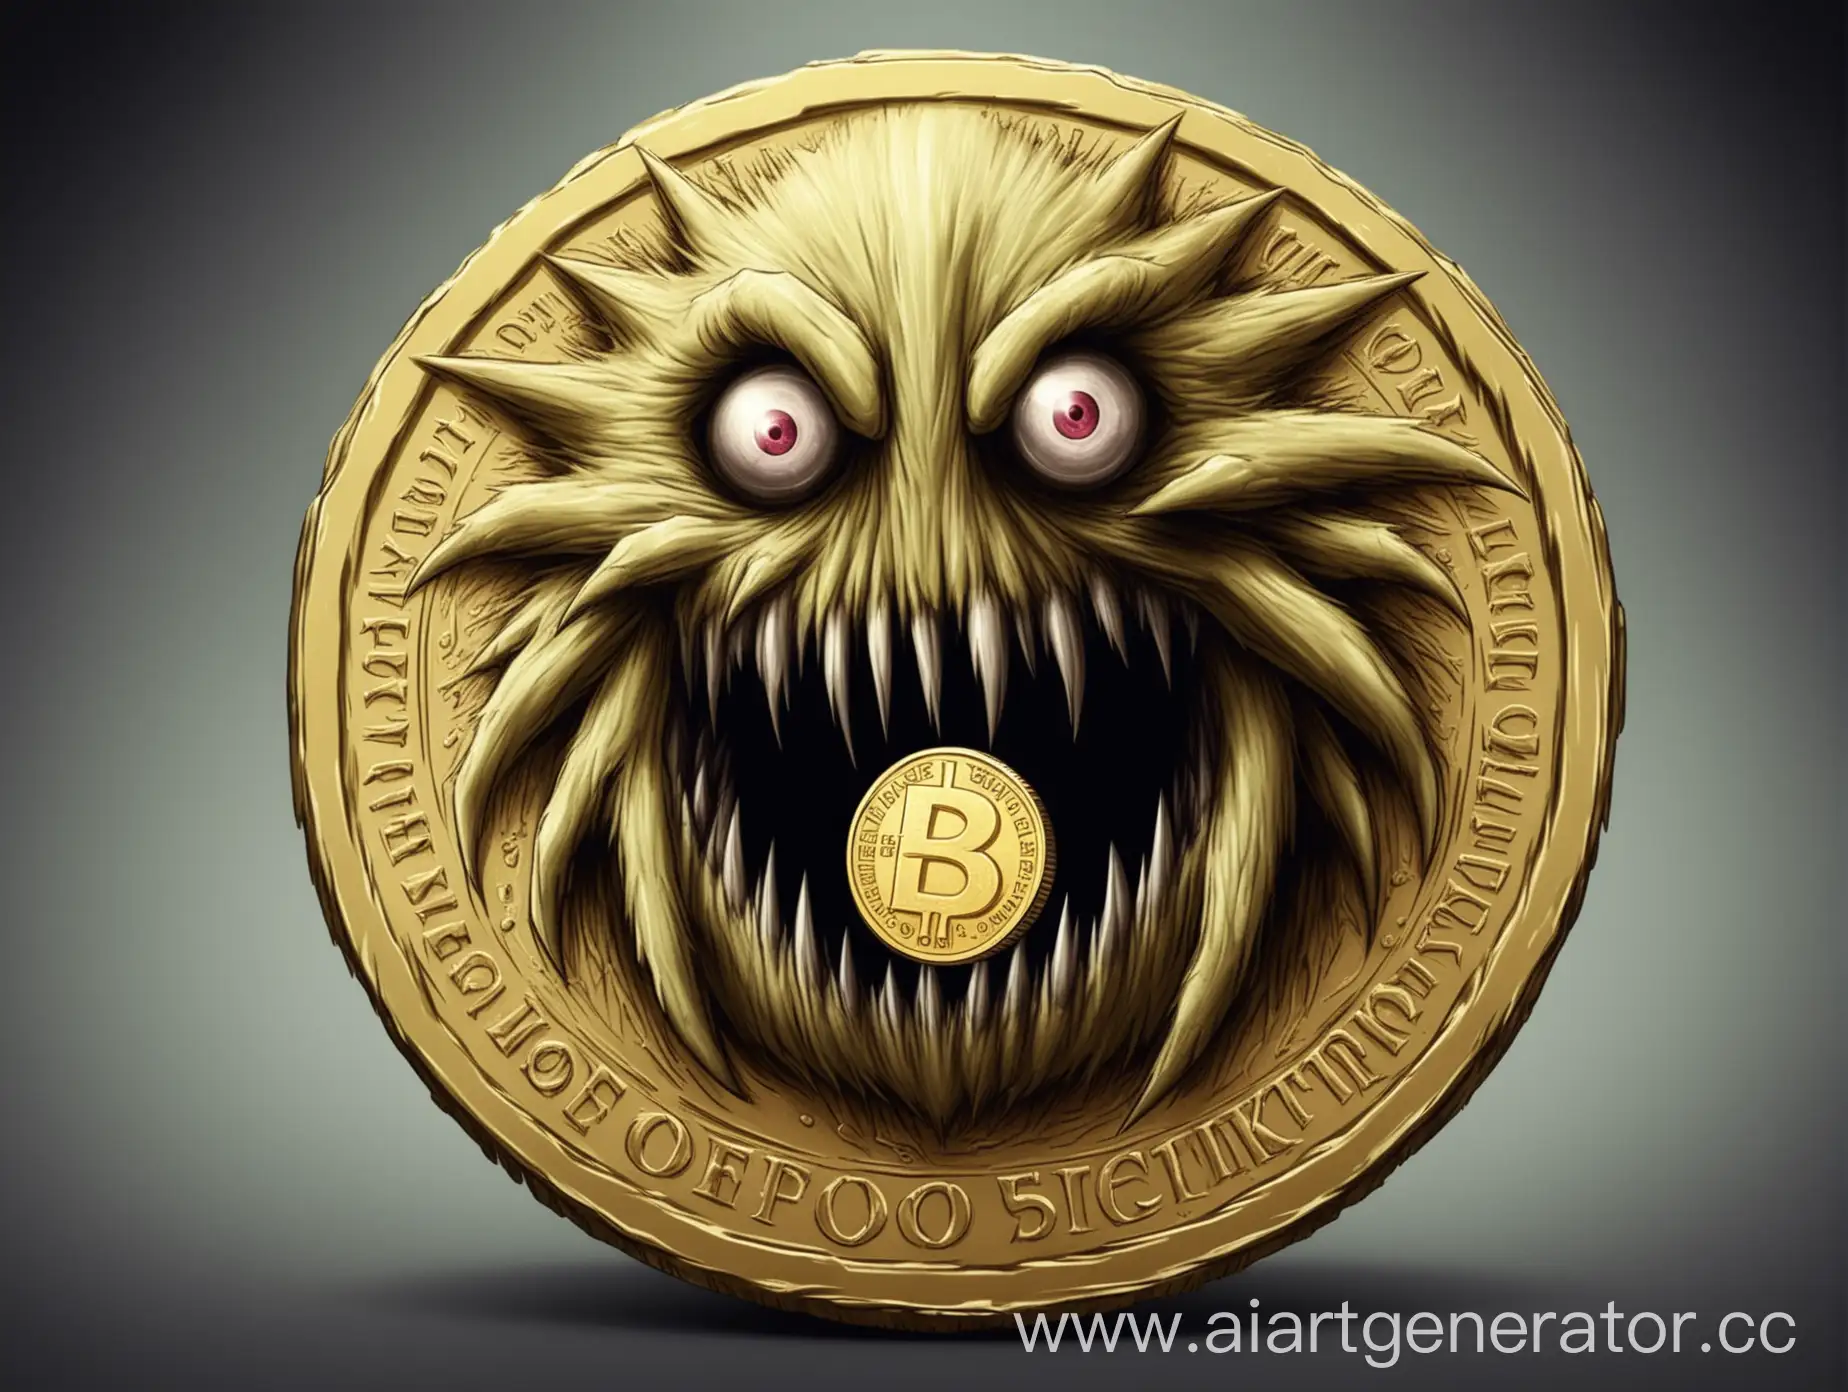 Sinister-CoinShaped-Monster-Emerging-in-Darkness